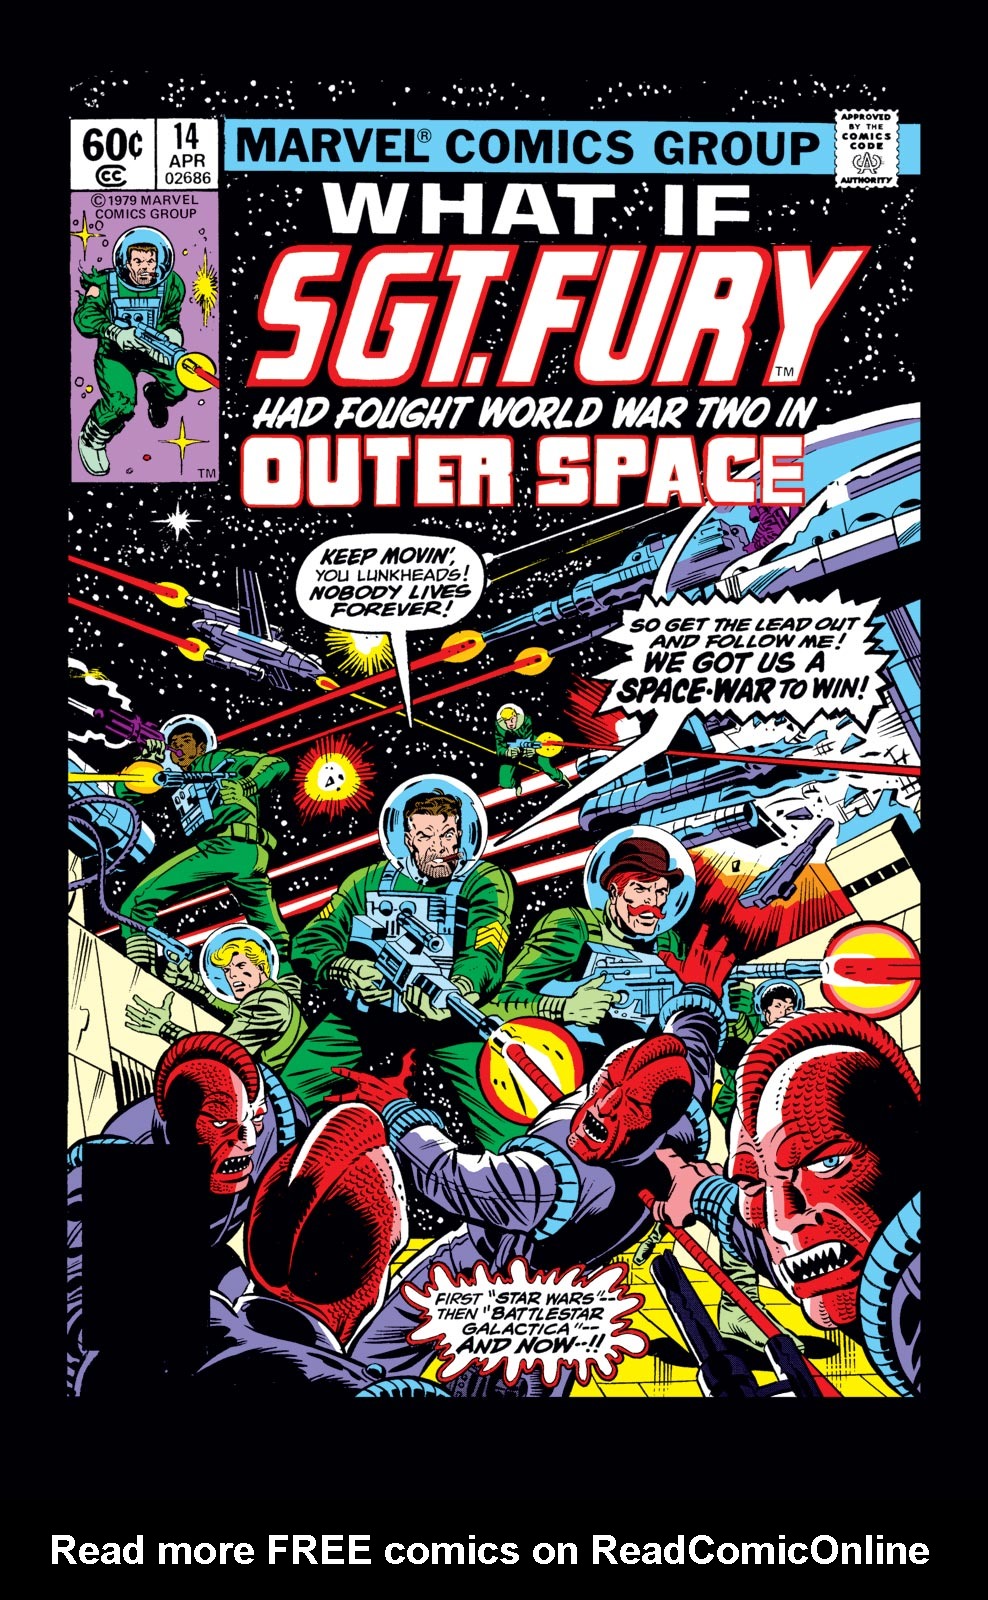 What If? (1977) issue 14 - Sgt. Fury had Fought WWII in Outer Space - Page 1